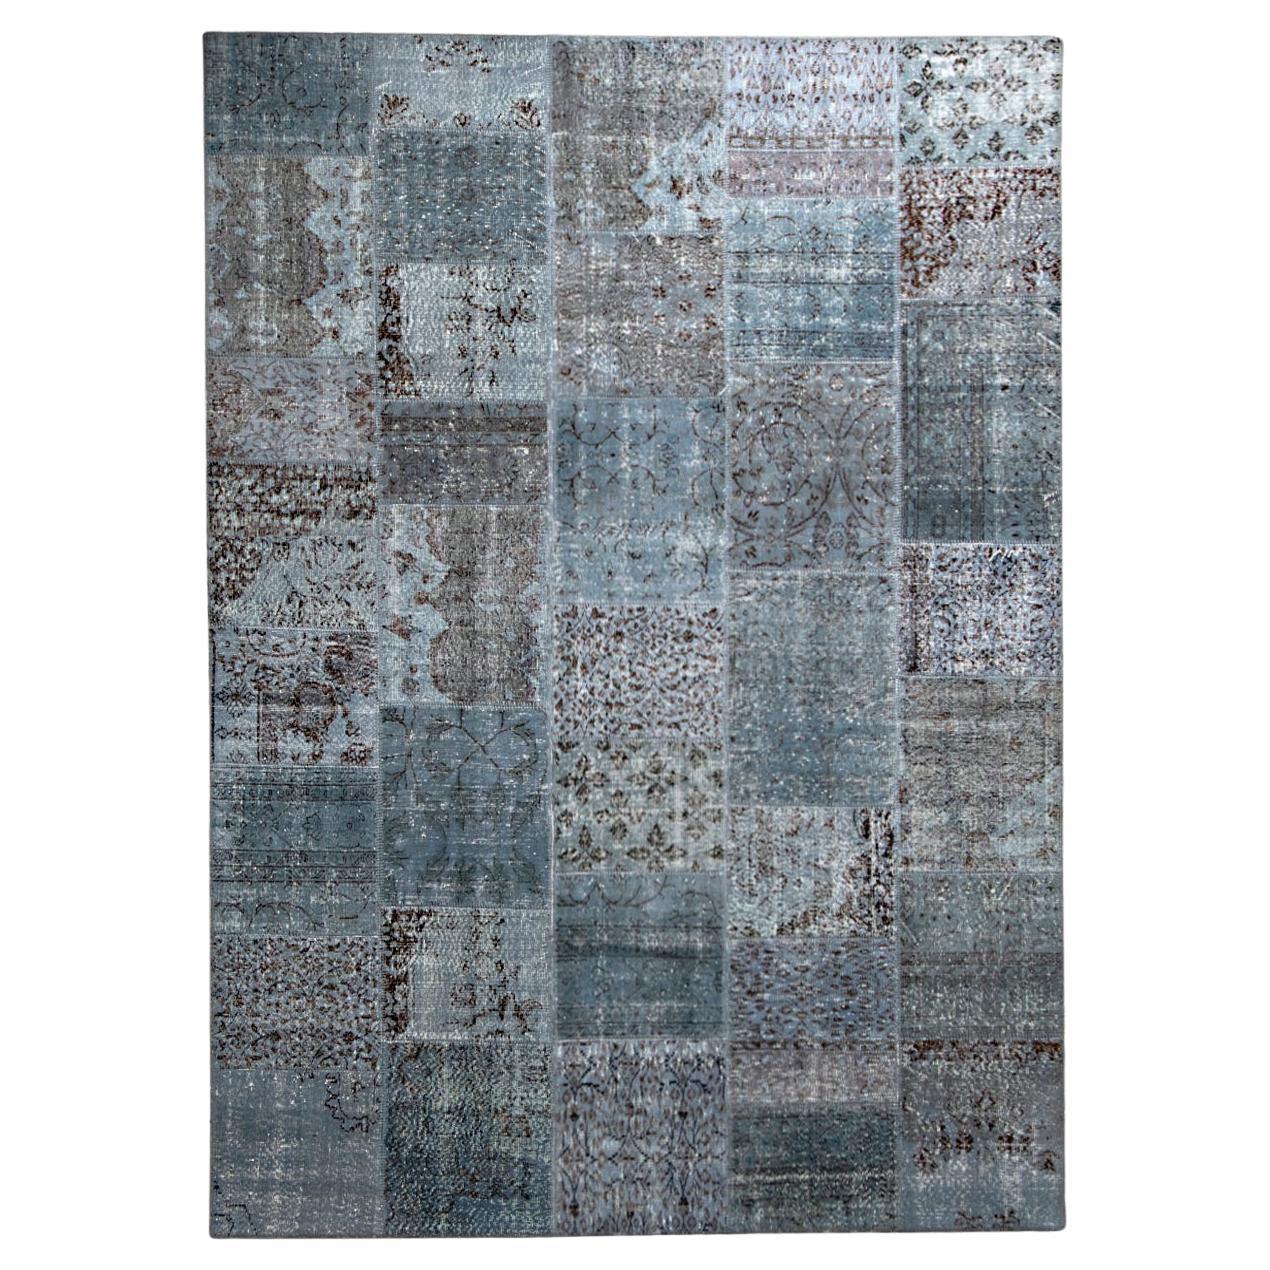 Antique Chic Vintage Blue Brown Wool Cotton Rug by Deanna Comellini 250x350 cm For Sale